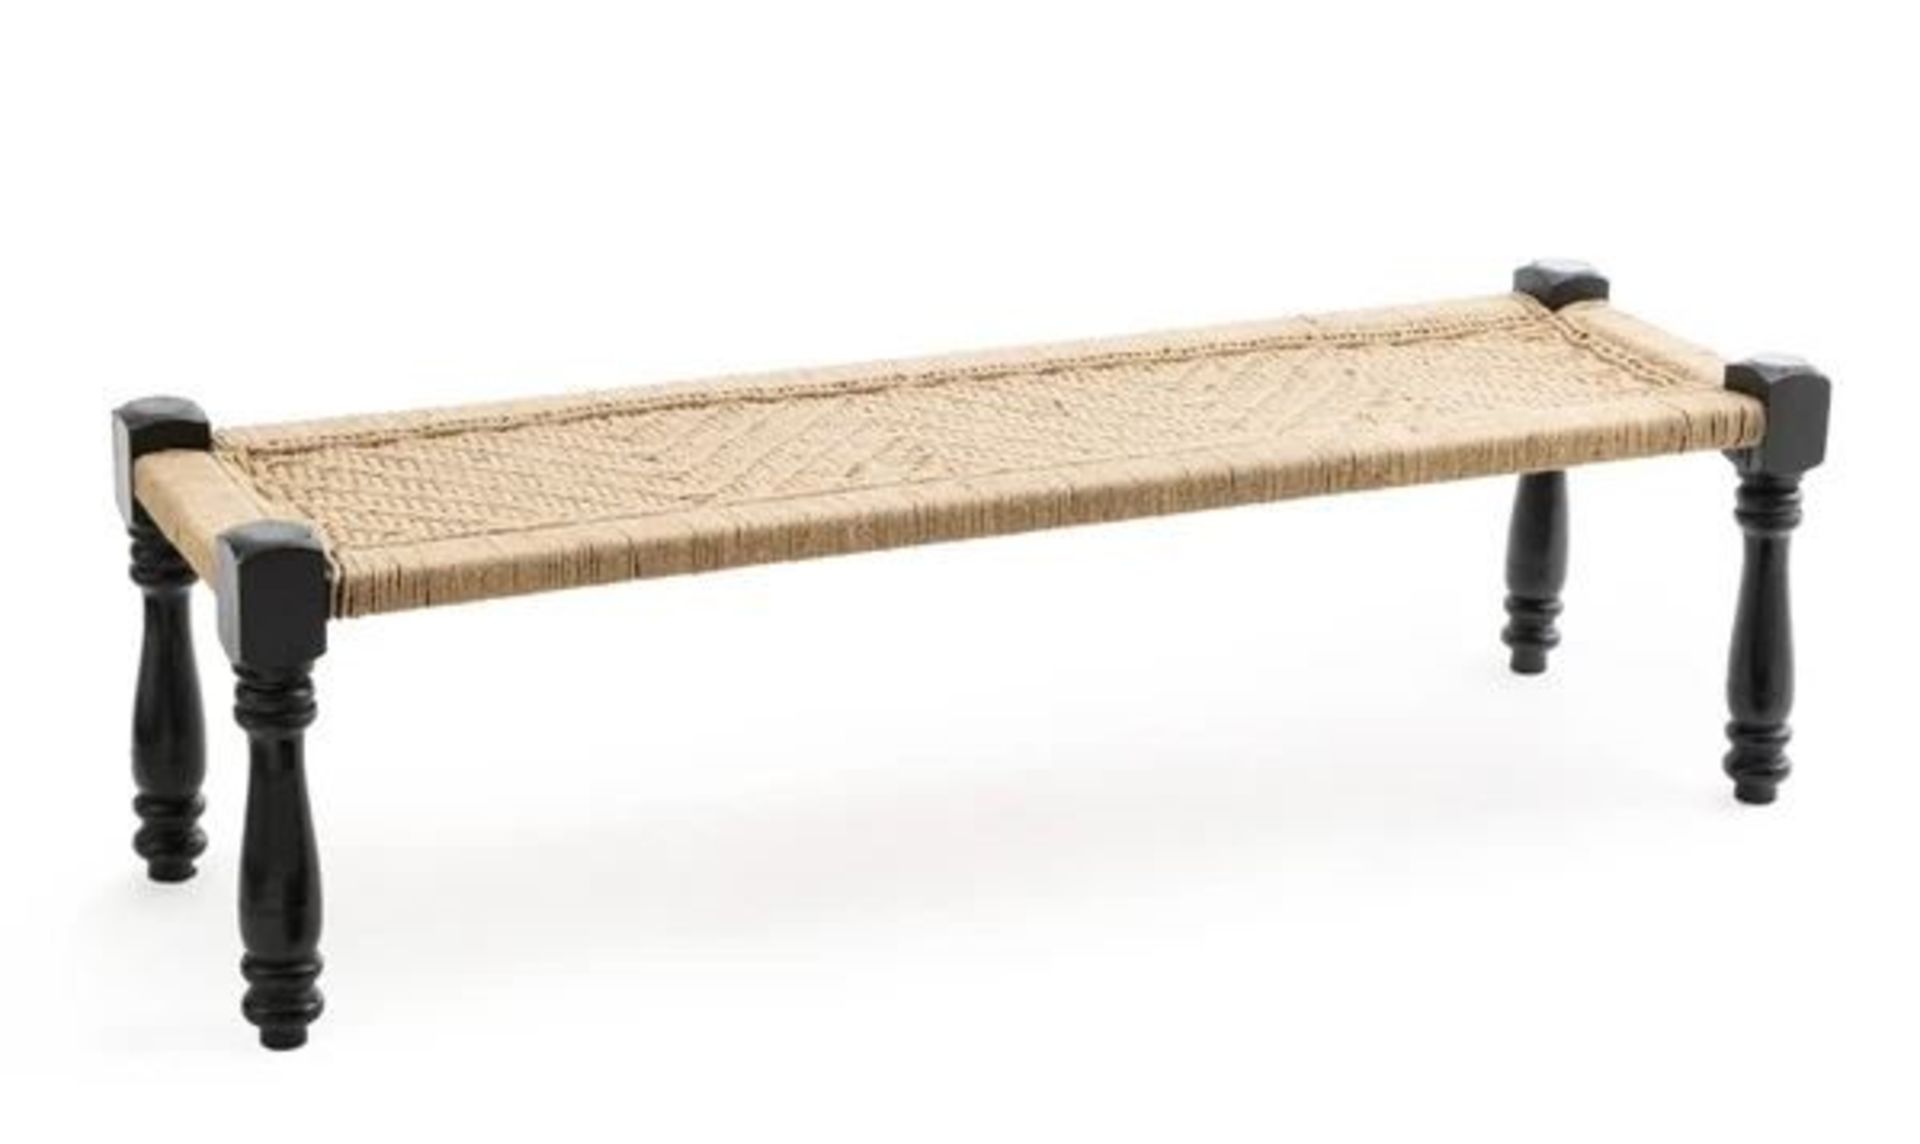 LA REDOUTE ADAS INDIAN STYLE BENCH IN MANGO WOOD & ROPE